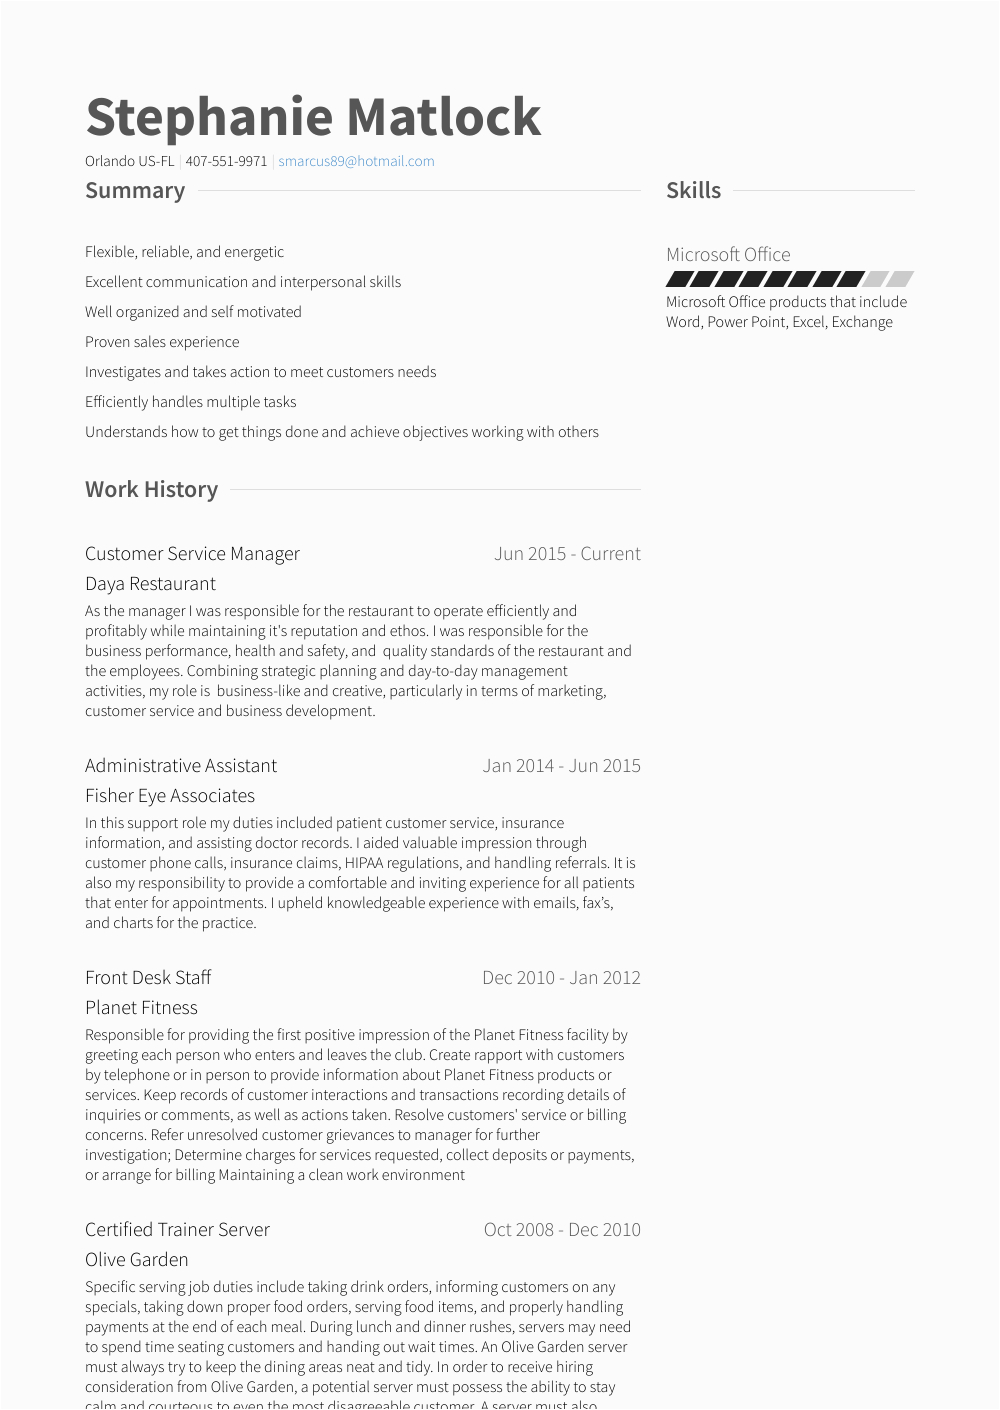 Resume Templates for Mums Returning to Work Sample Resume for Stay at Home Mom Returning to Work